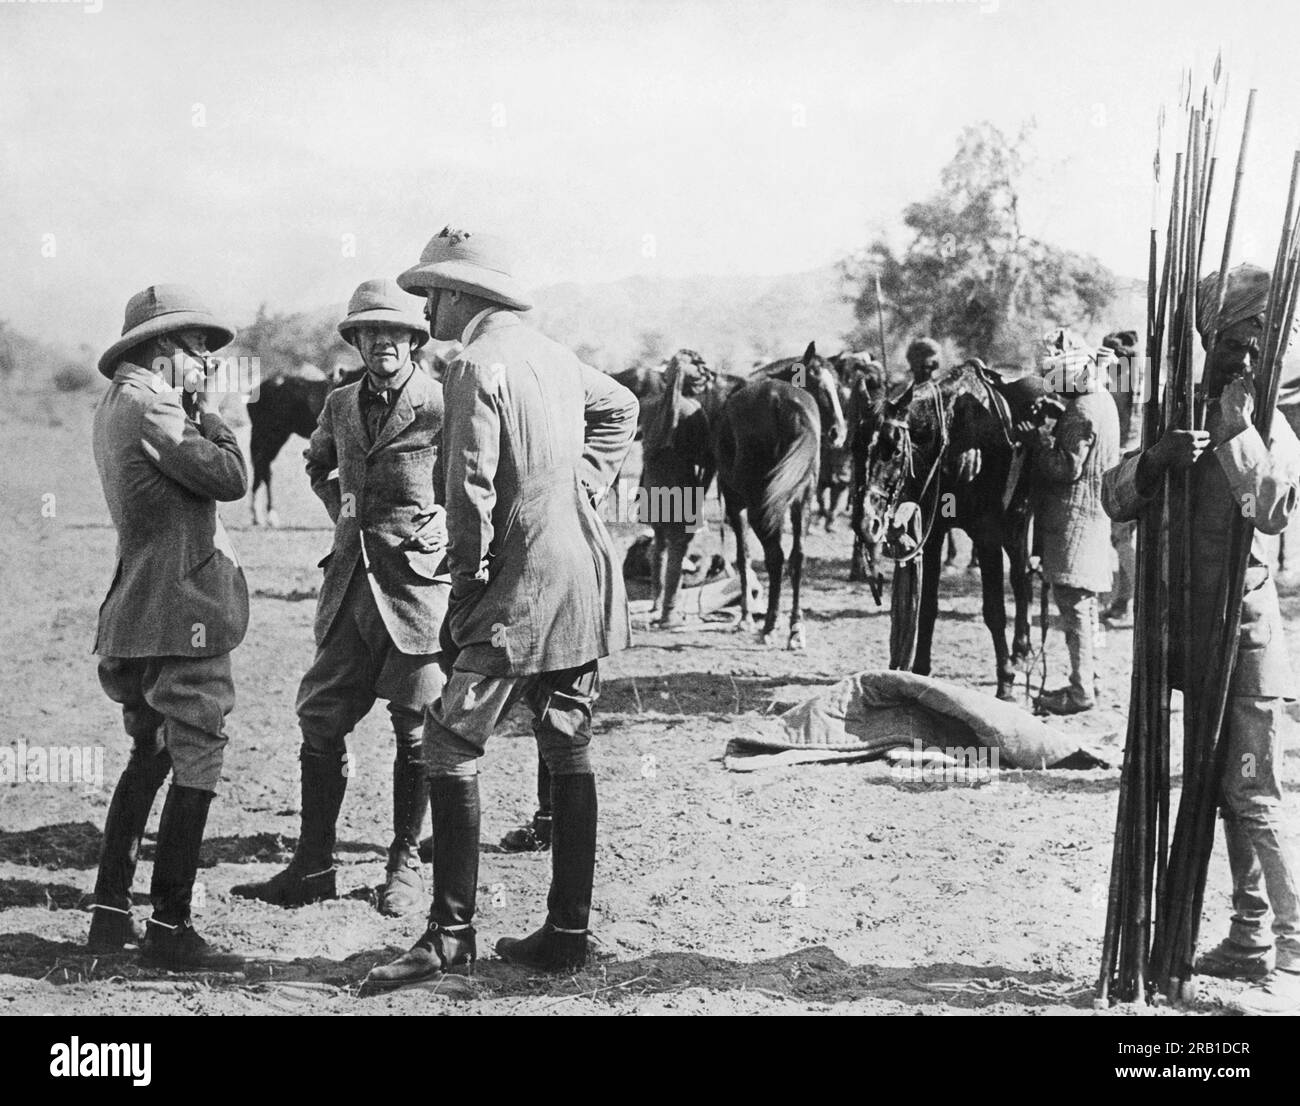 Jodhpur, India:   January 5, 1922 The Prince of Wales fastens his helmet as he chats with Sir Lionel  Halsey and Col. Wogan just before the start of the boar hunt. Mounted beaters drive the boar towards the mounted hunters who then stick the boars with the steel tipped bamboo lances being held by the native at the right. Stock Photo